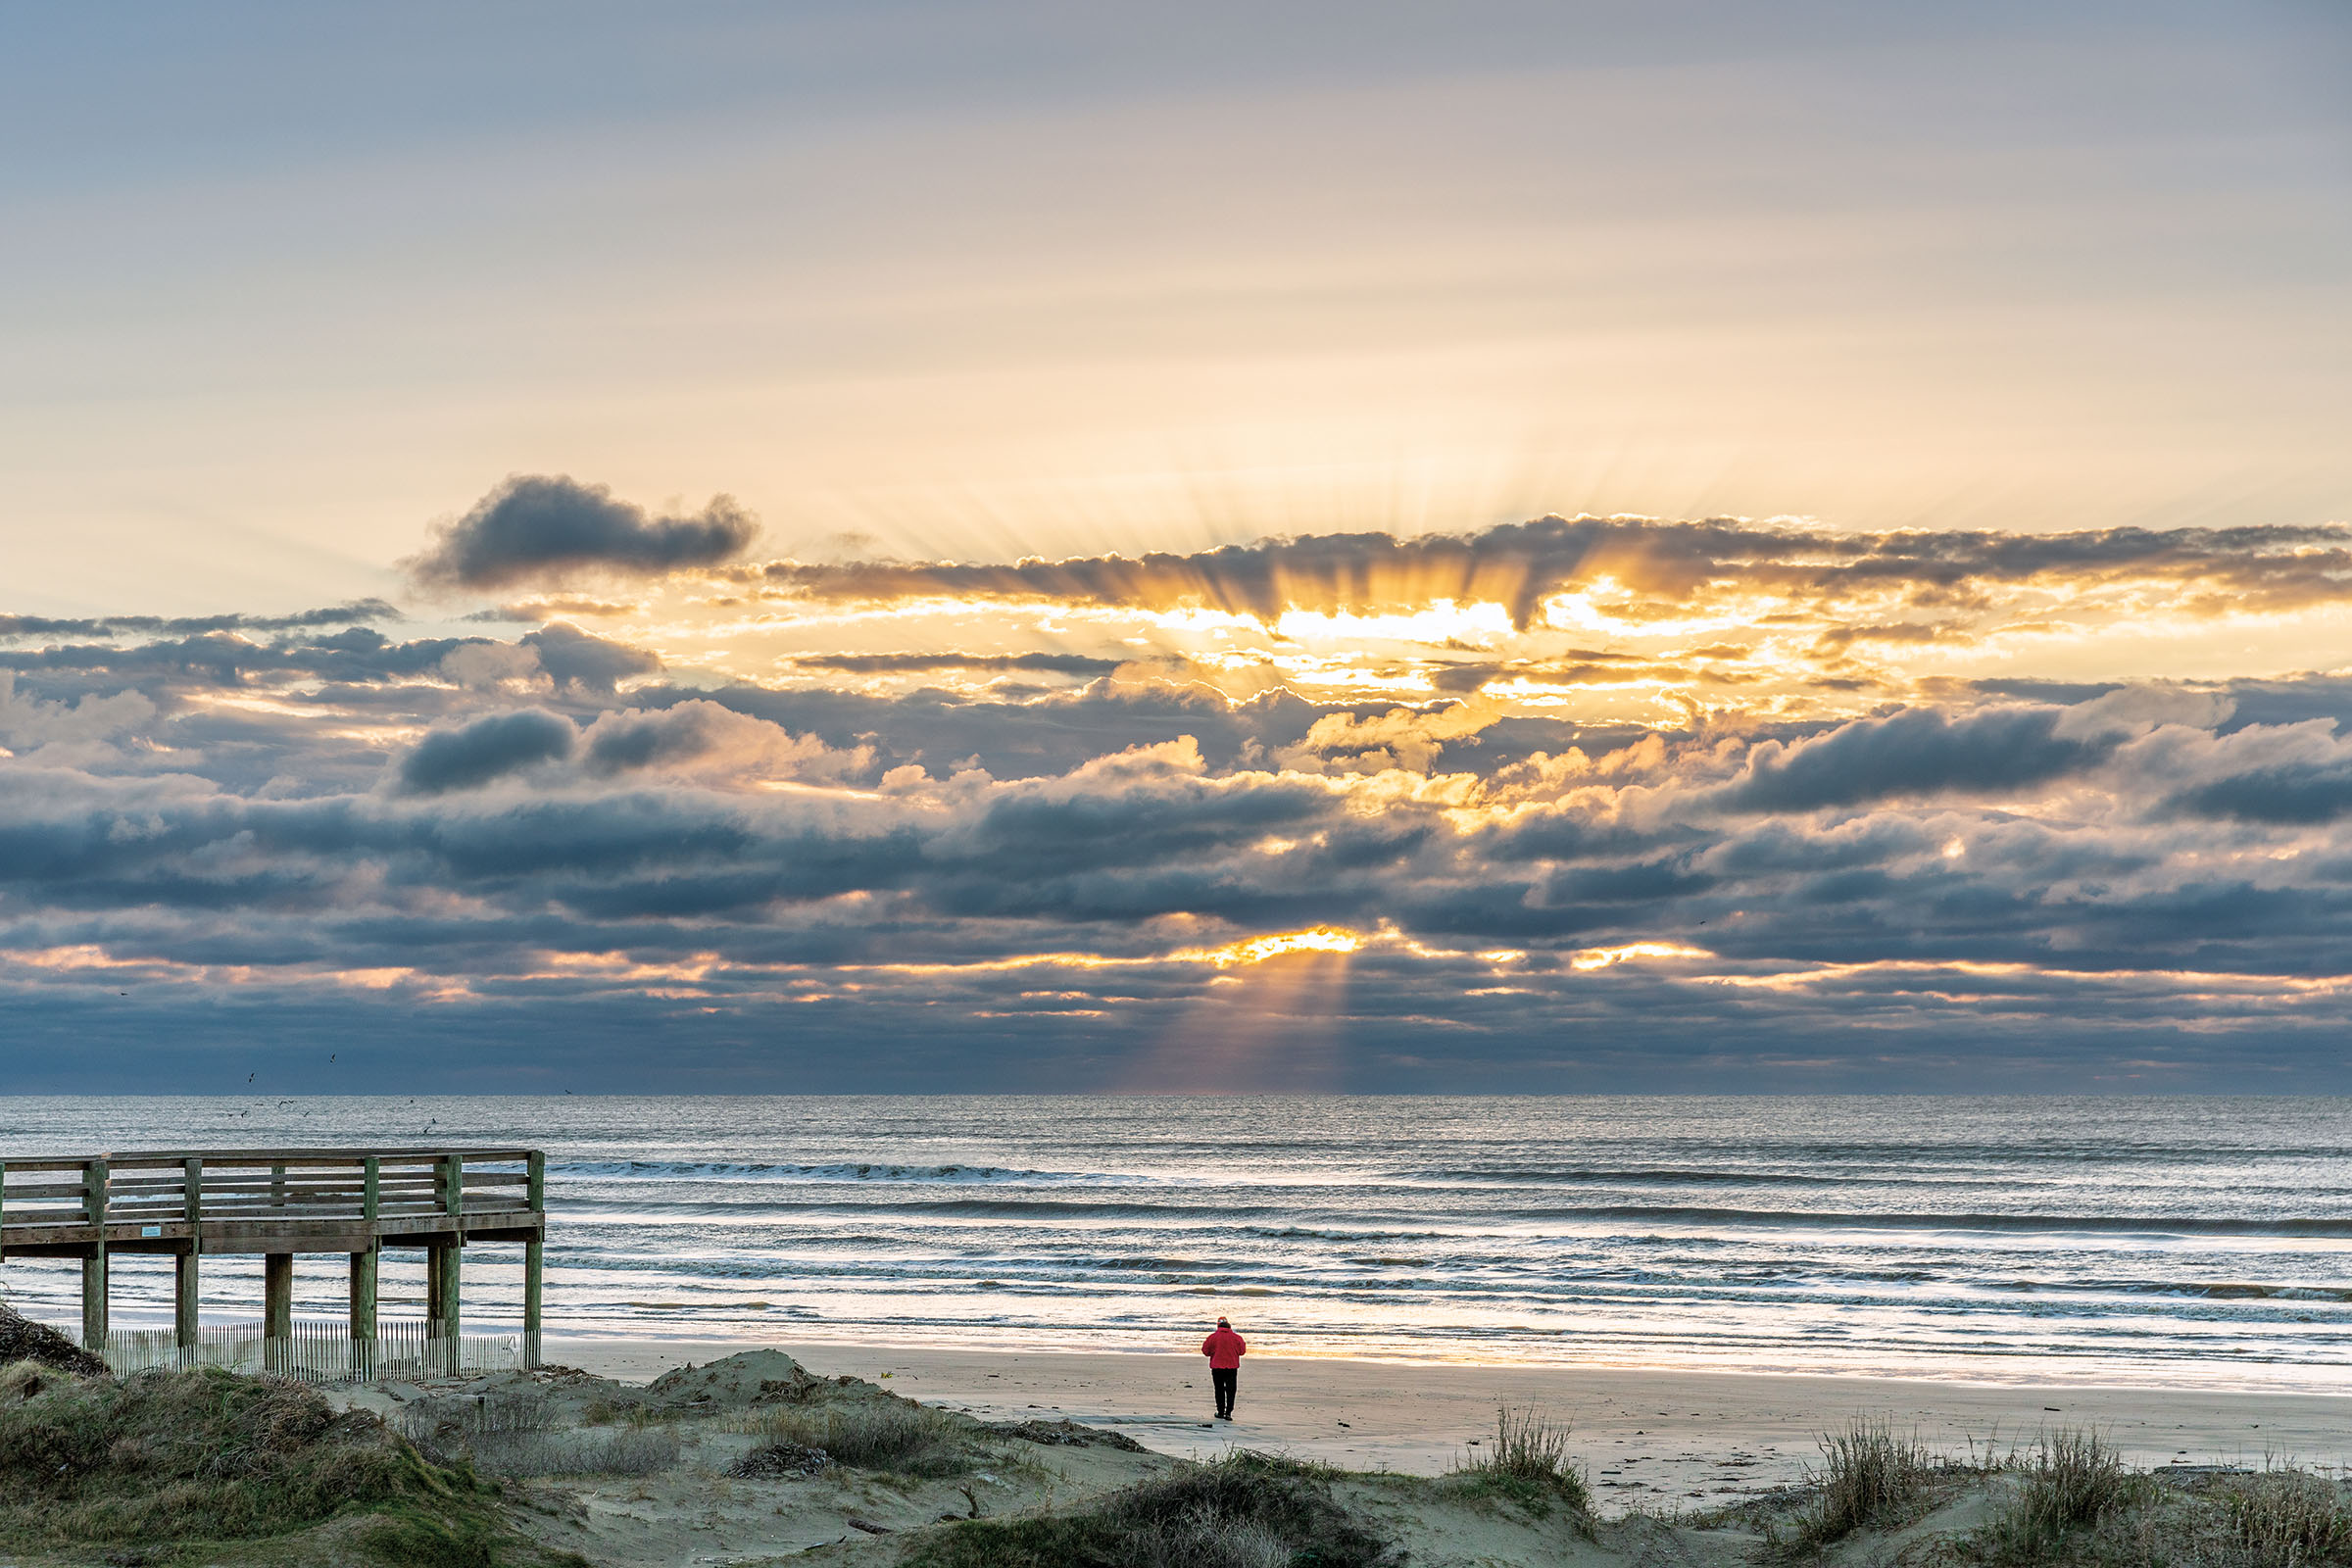 A person walks along a beachfront in a morning sunrise with striations of gray clouds and still waves